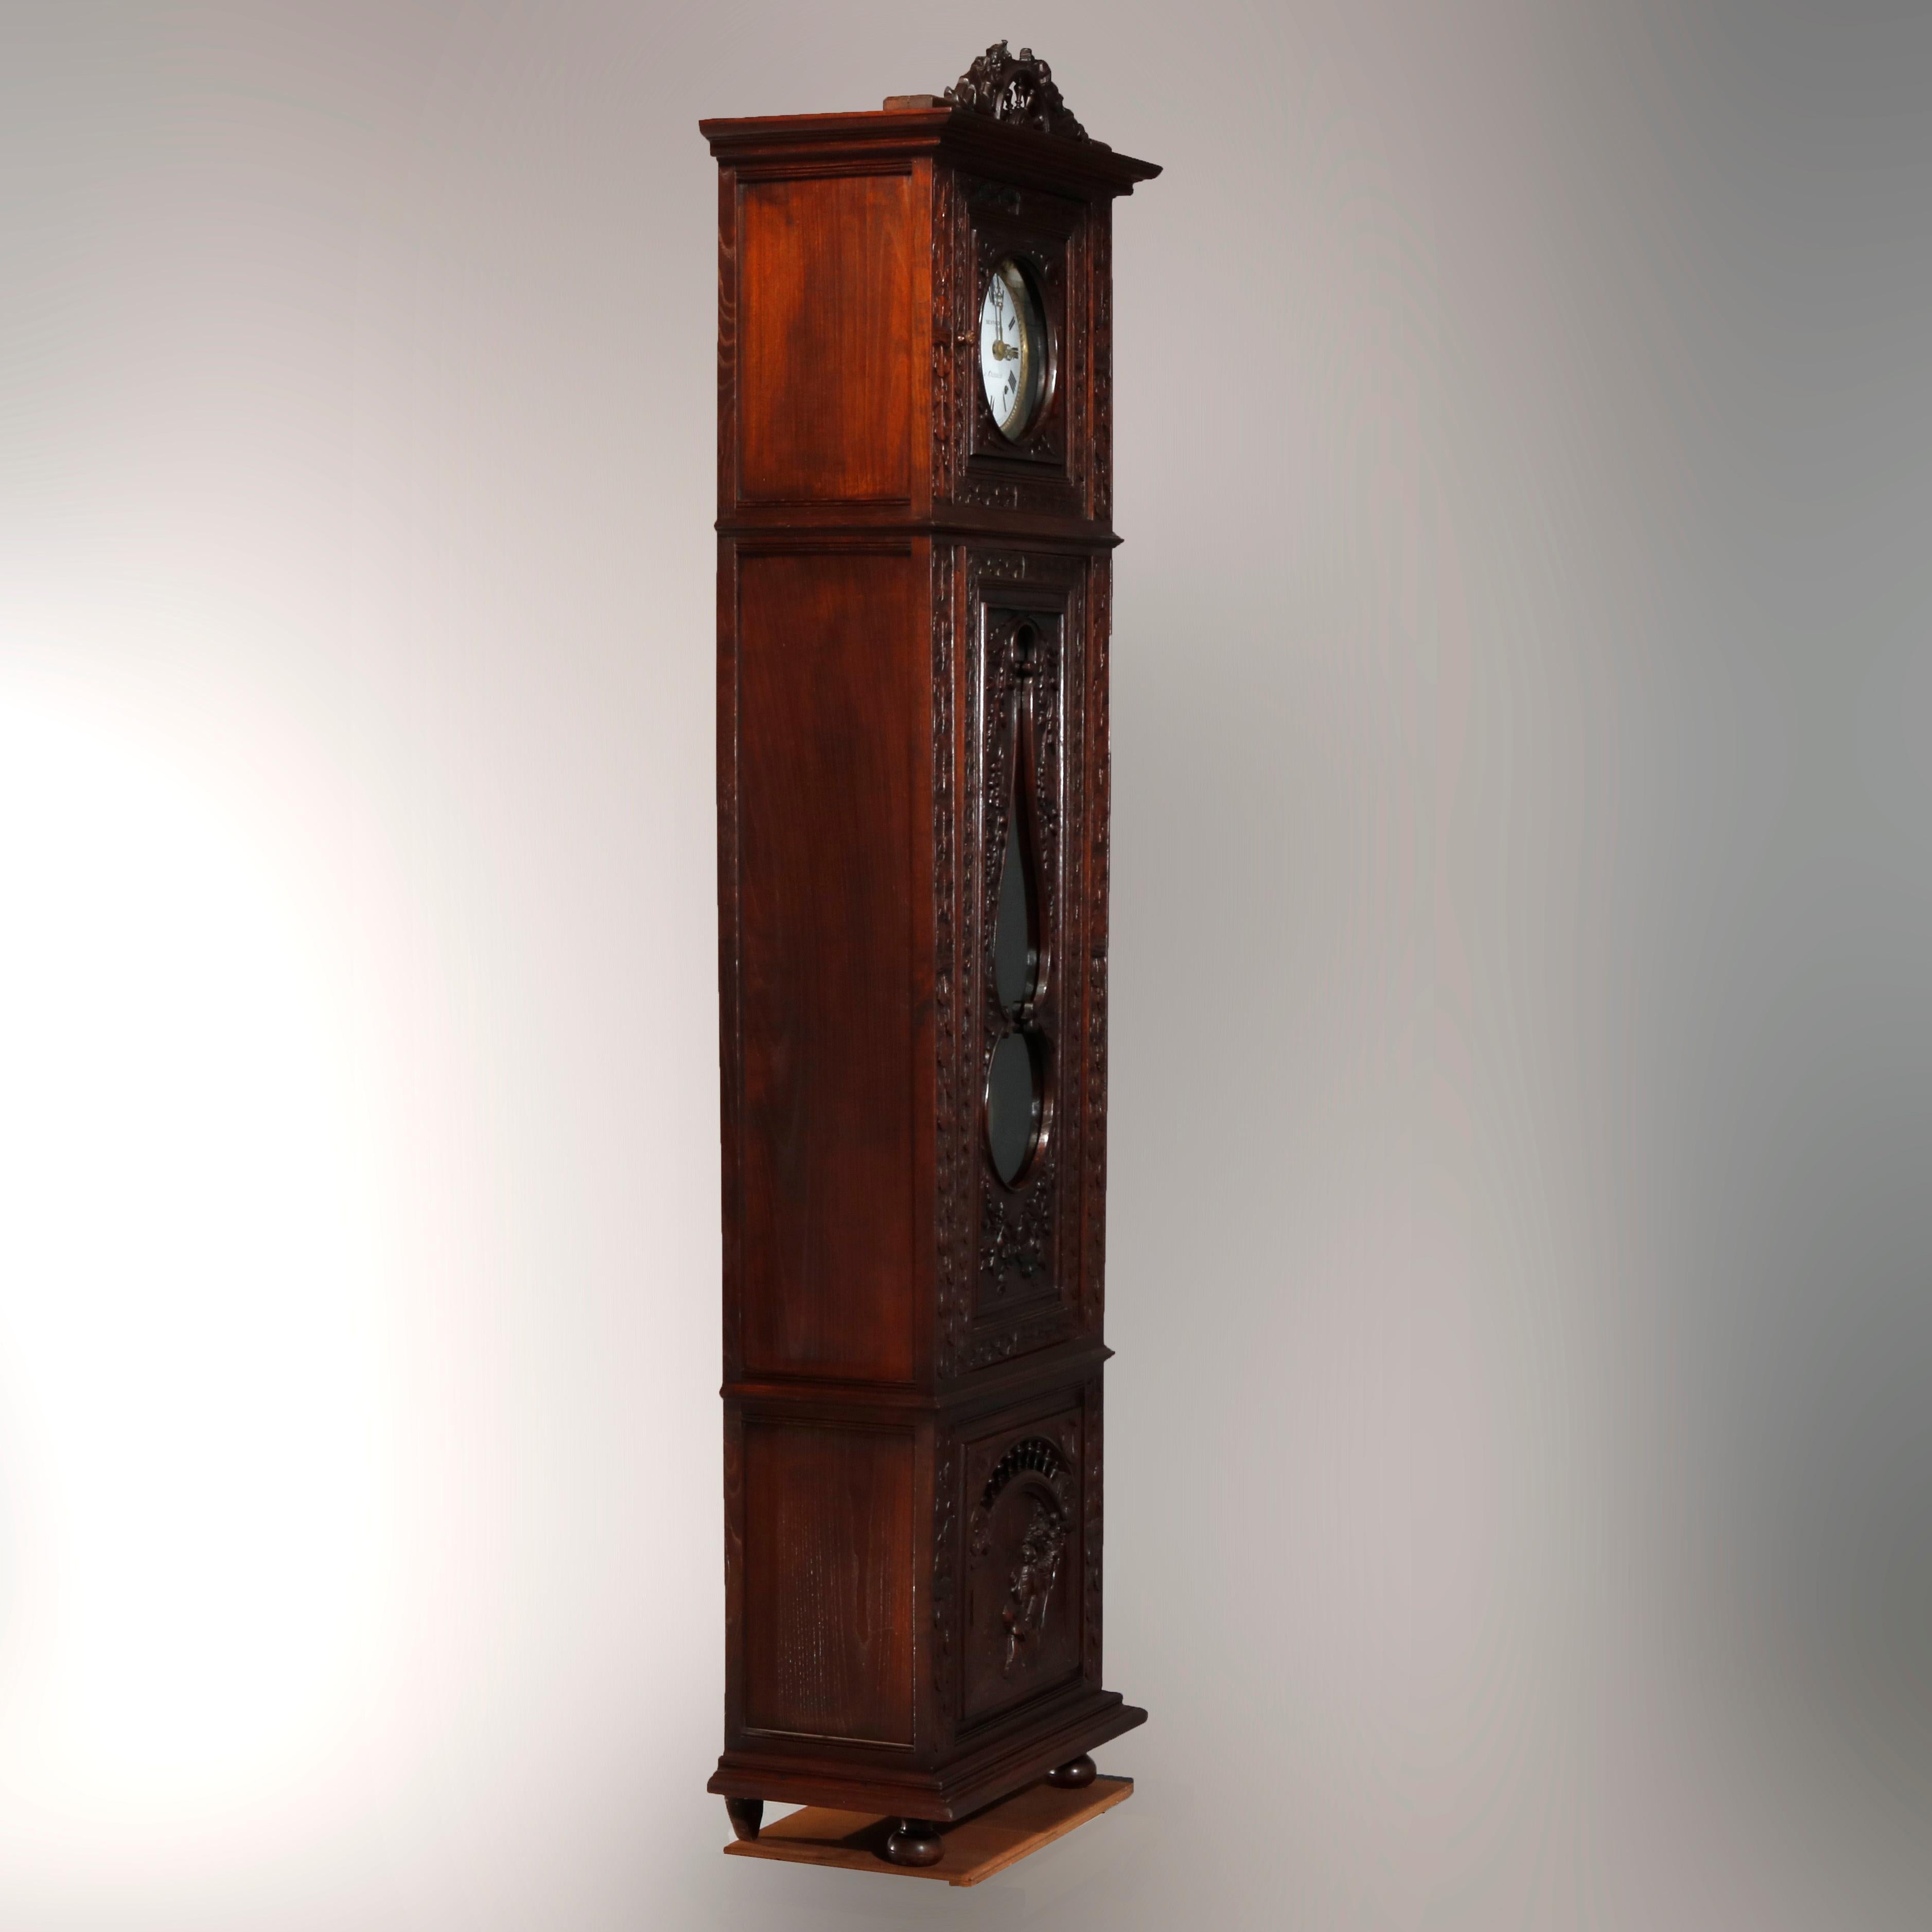 An antique Continental French figural longcase clock by Besnard a Chateauin offers deeply carved oak case with crest having central wheel and flanking music men surmounting case with high relief carving throughout and terminating in base with scene